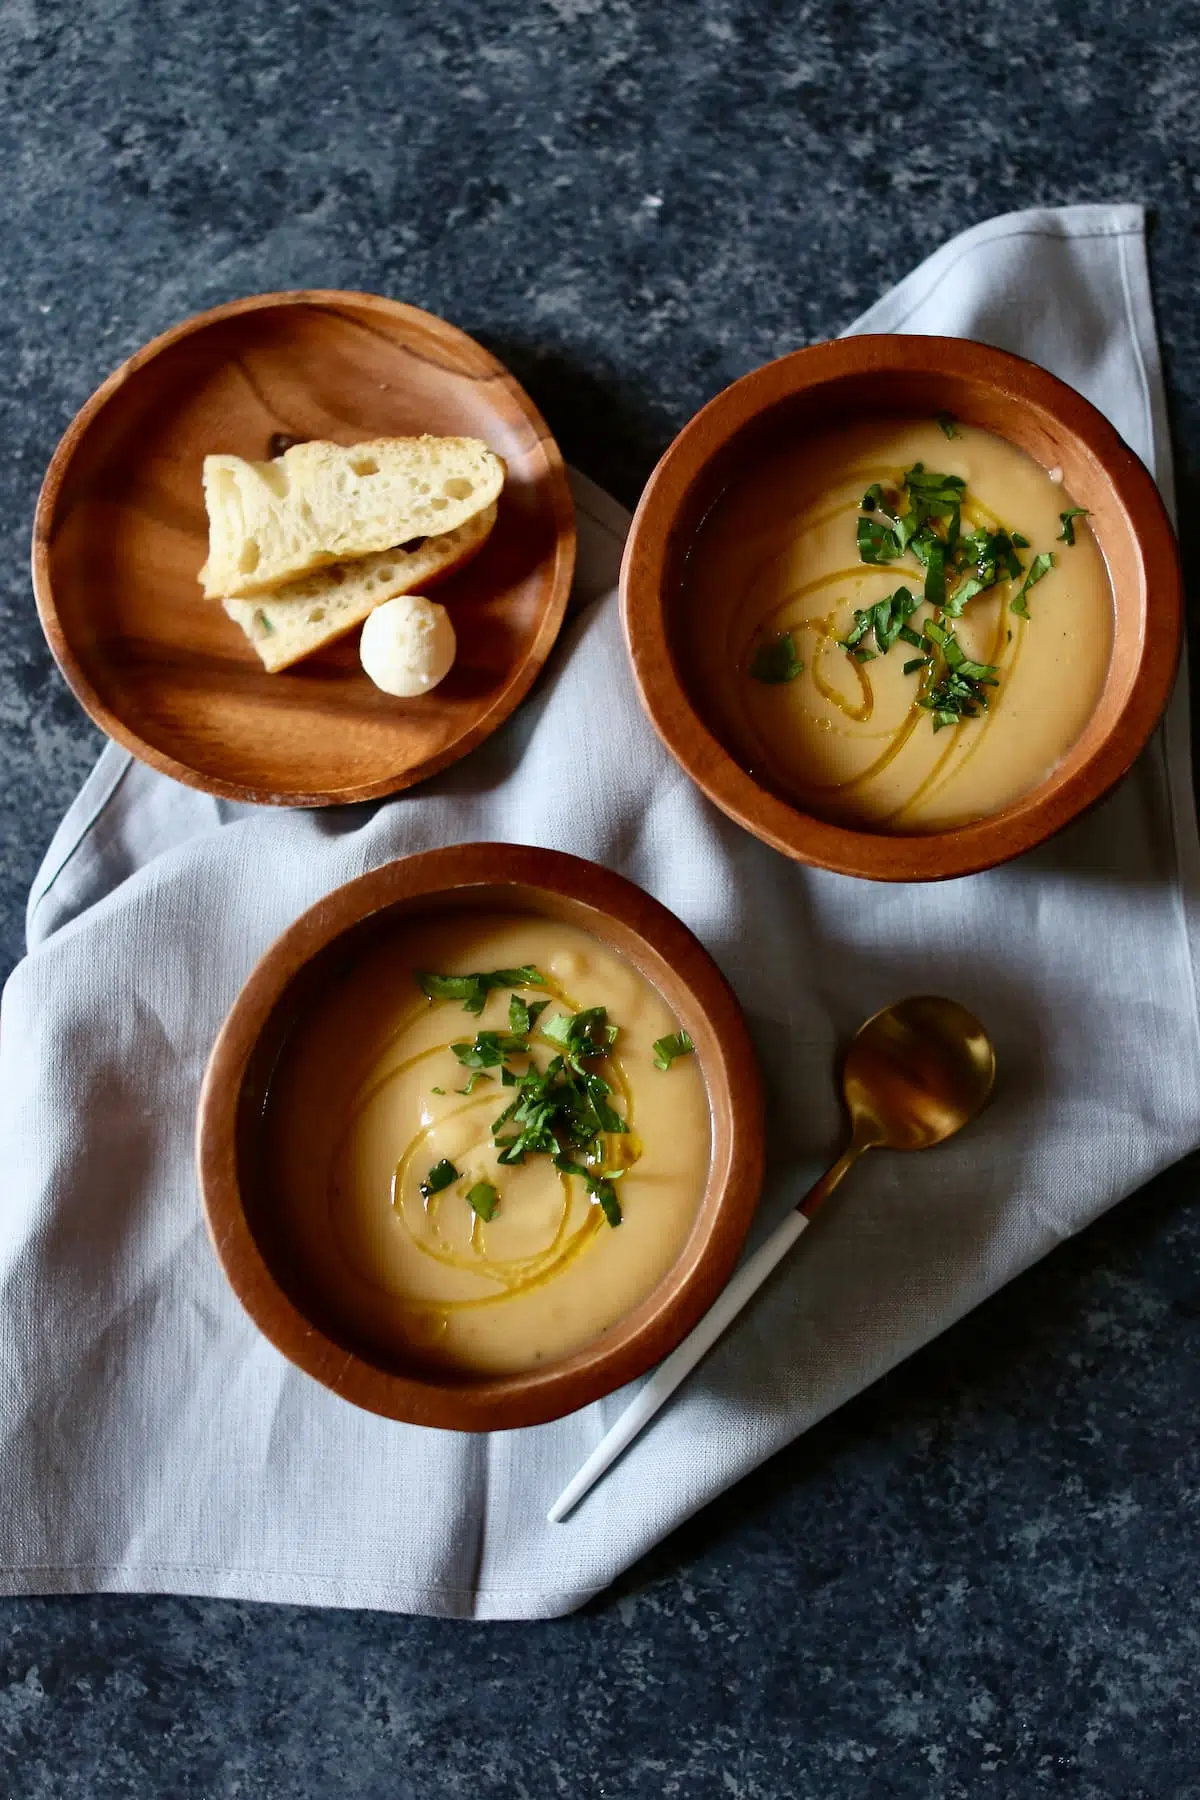 soup in wooden bowls with bread on a napkin.